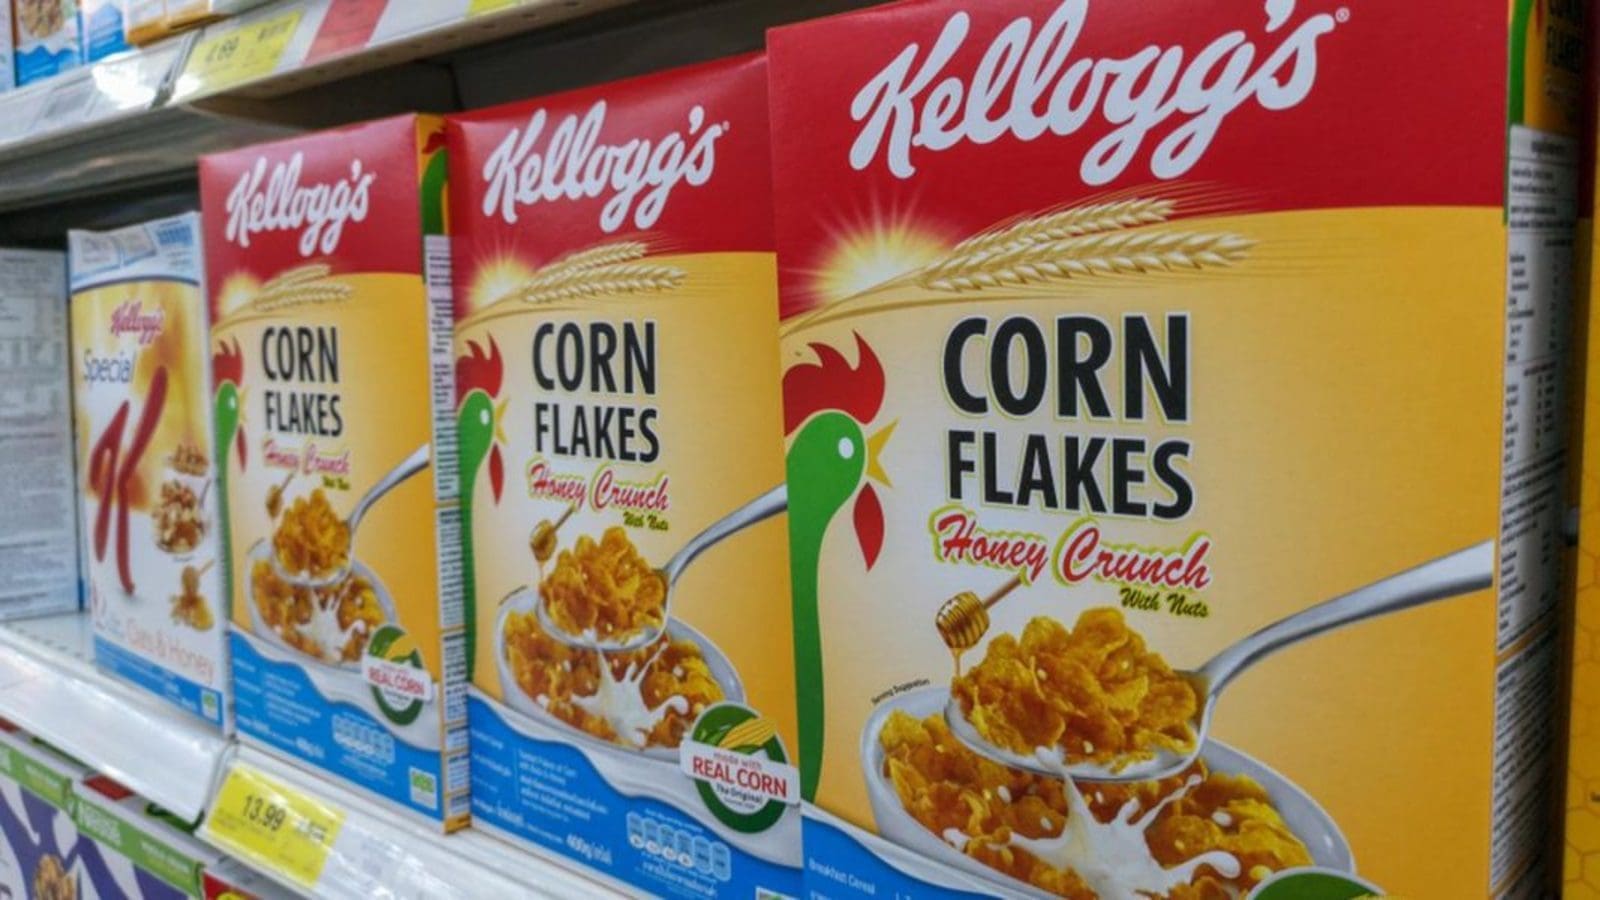 American snack and cereal company Kellogg to split into two independent companies